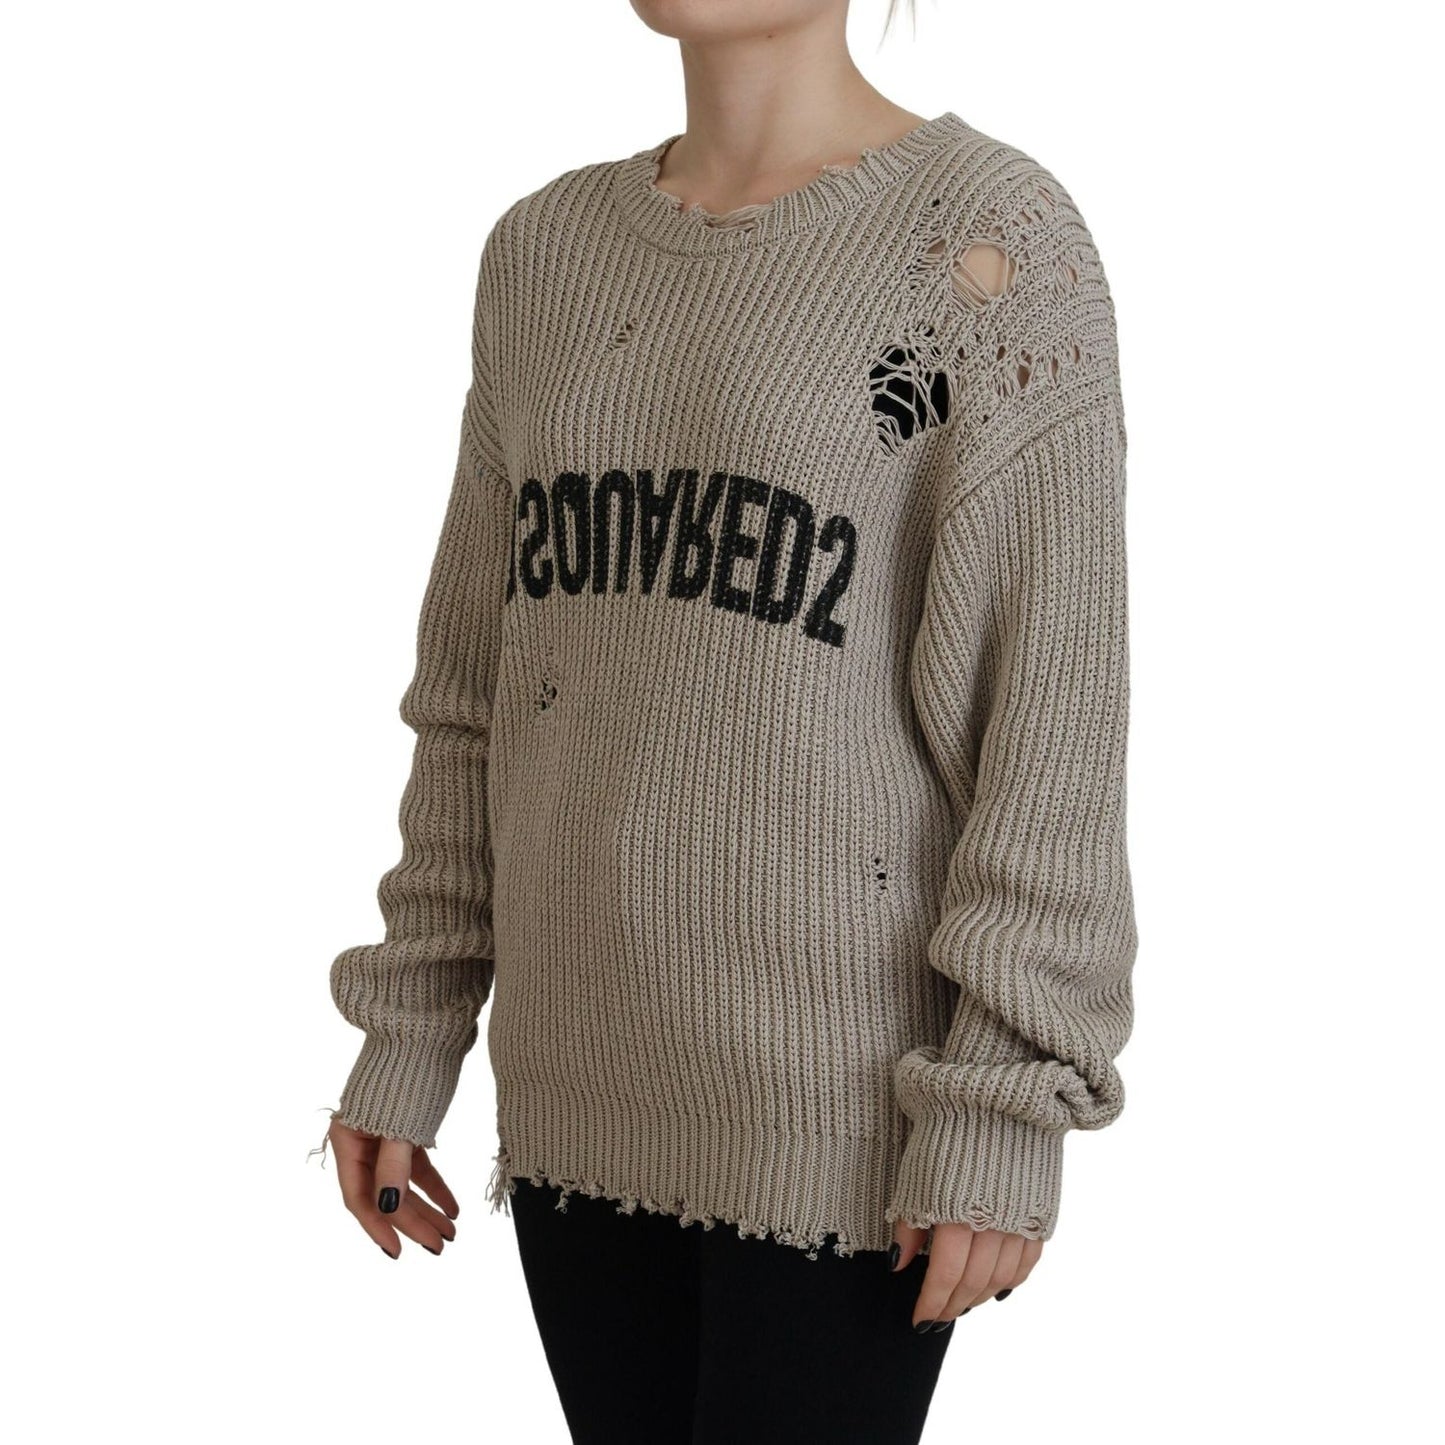 Dsquared² Beige Cotton Knitted Crewneck Pullover Sweater beige-cotton-knitted-crewneck-pullover-sweater